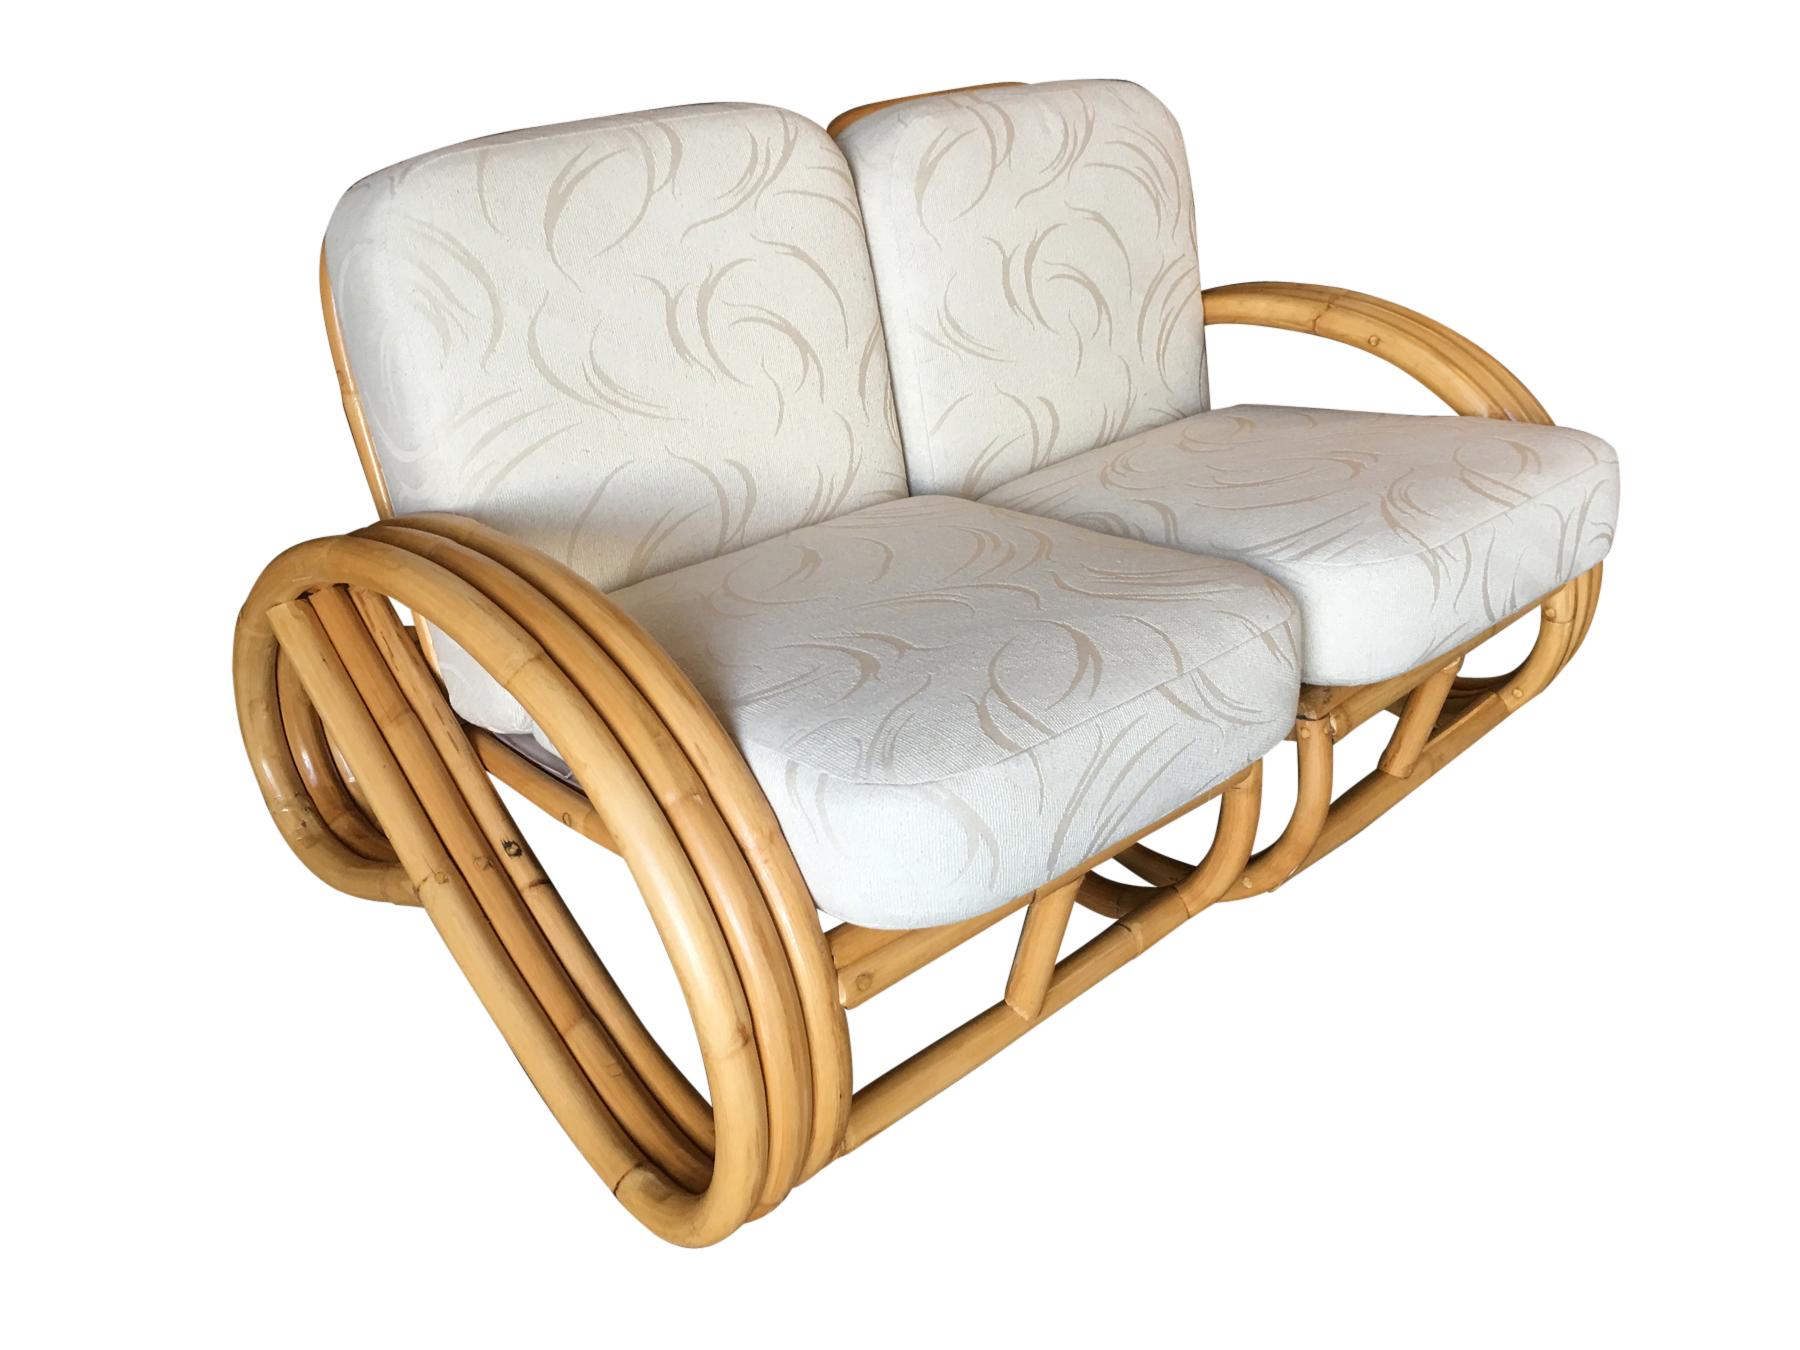 Restored 3 stranded 3/4 pretzel arm, rattan 2-seater sectional sofa with line base. Comes with wedge end/drink table and can be configured in several arrangements. 

Inspired by Paul Frankl this lounge is one of the rarest of all designs. The